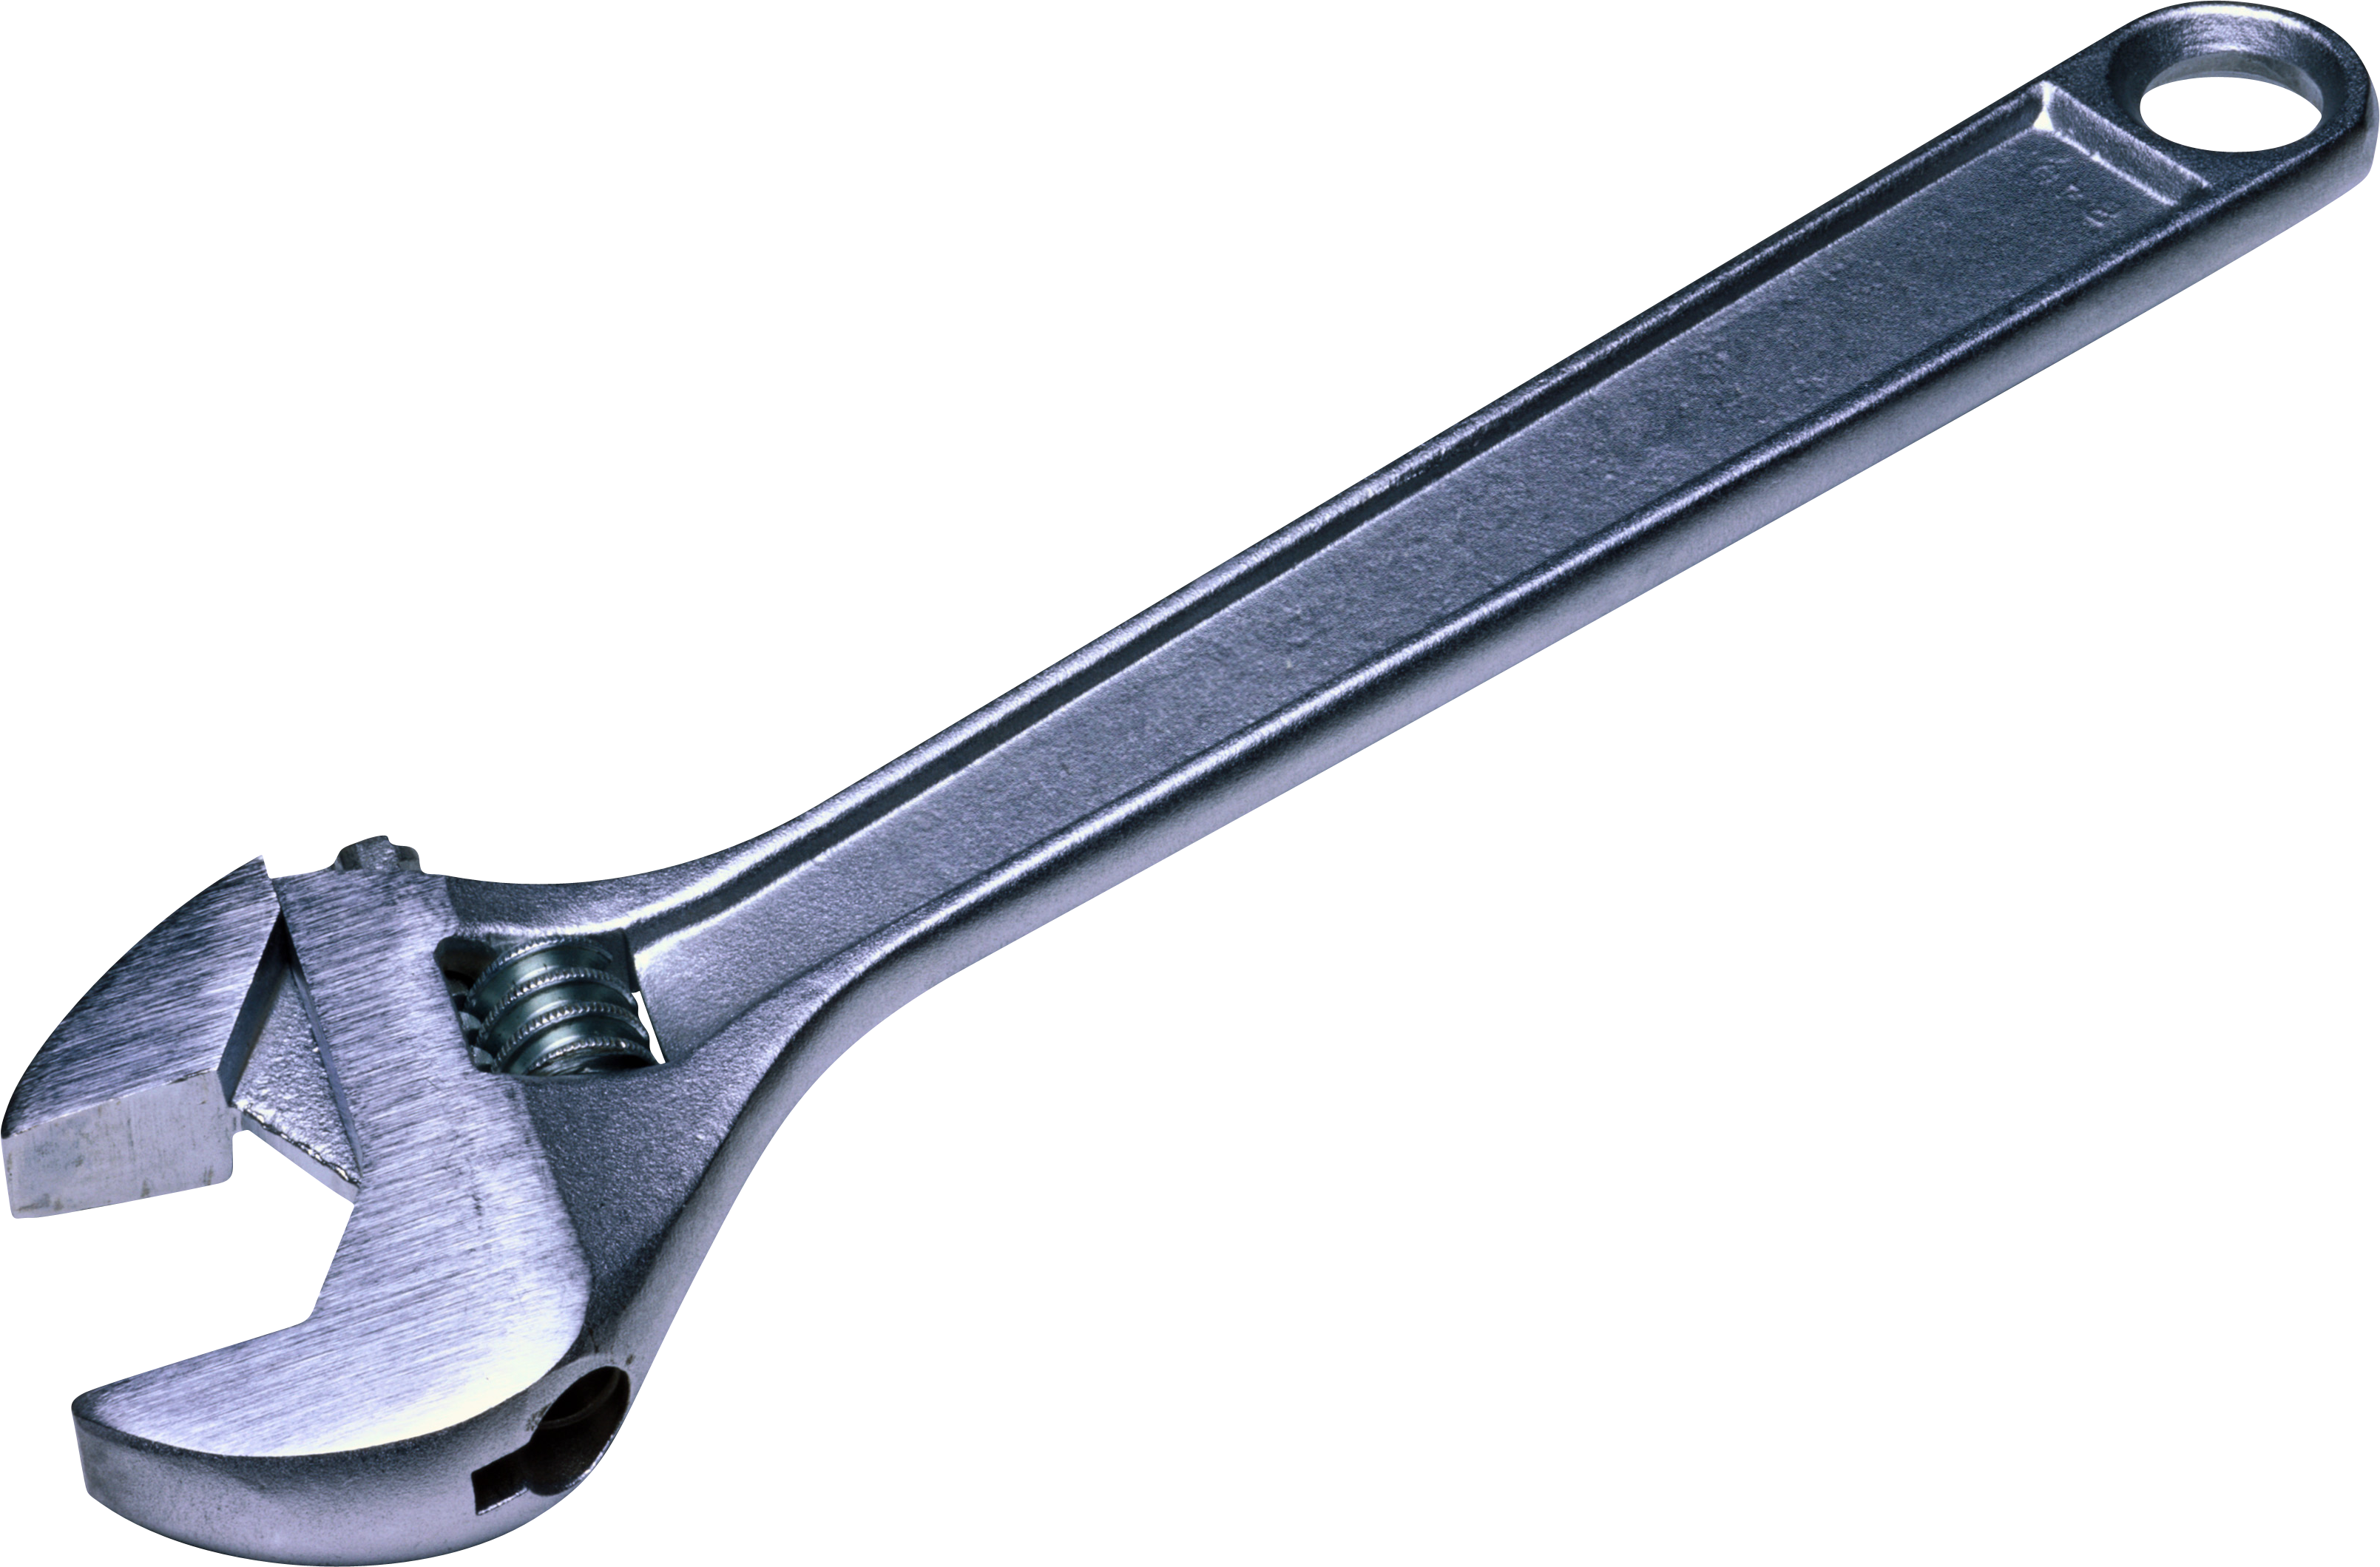 Wrench PNG1108.png